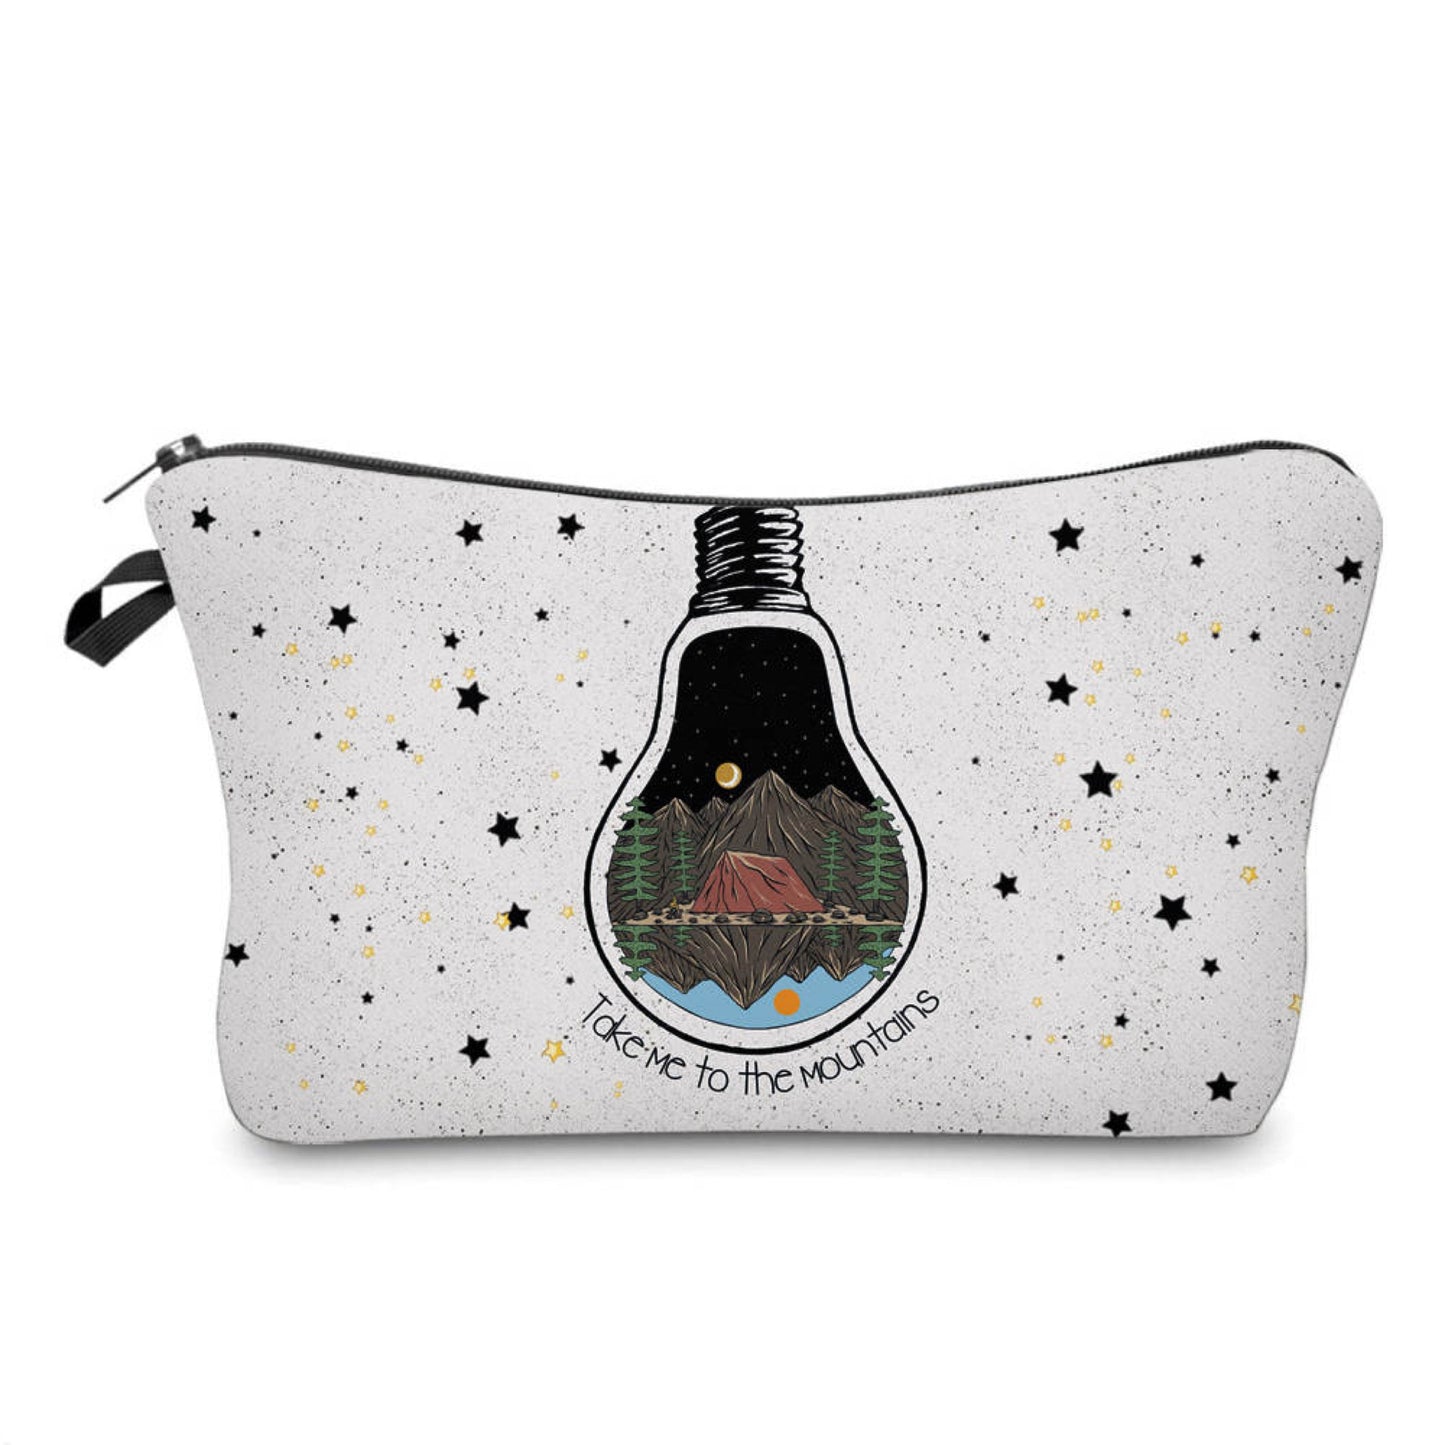 Take Me To The Mountains - Water-Resistant Multi-Use Pouch